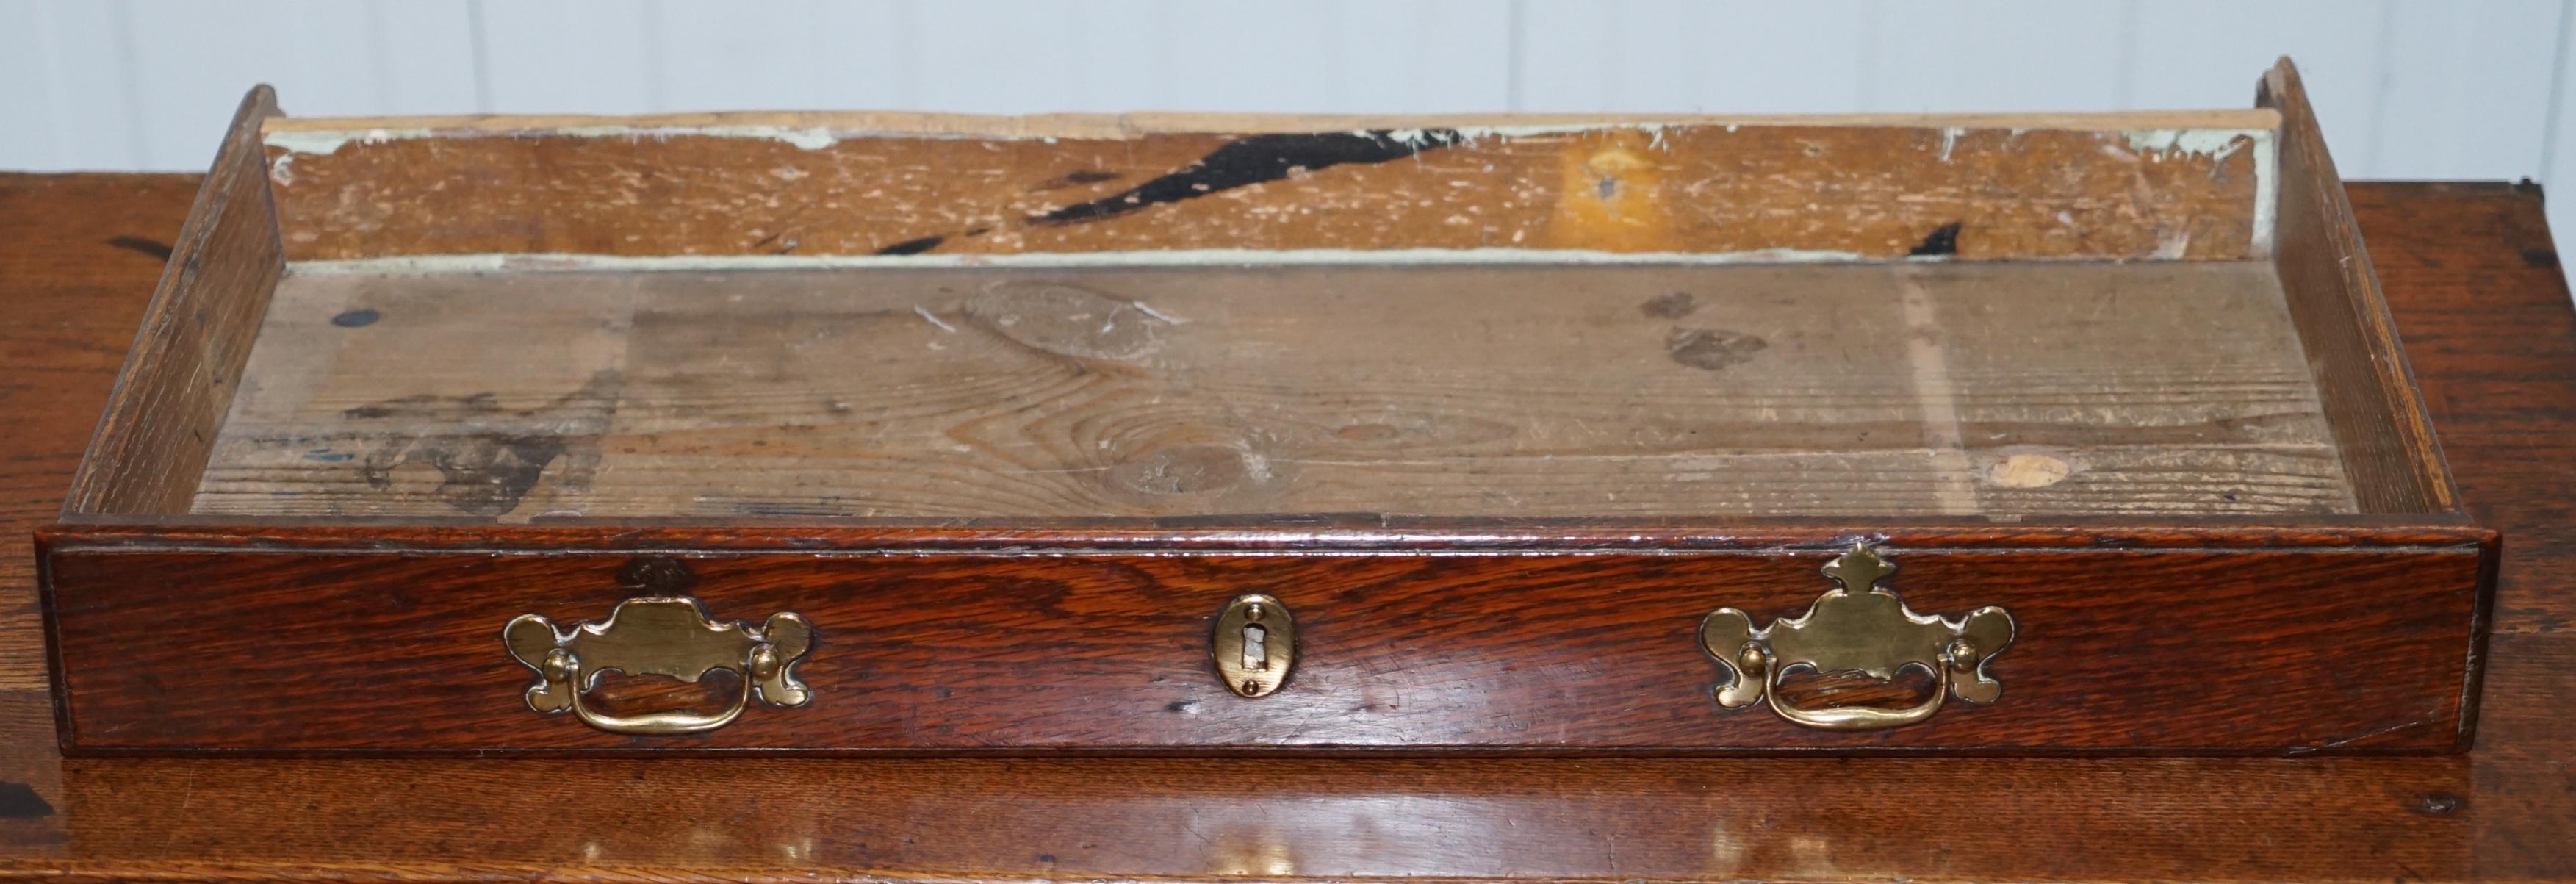 Early Georgian Irish circa 1740 Side Console Table for Restoration Lovely Find 9